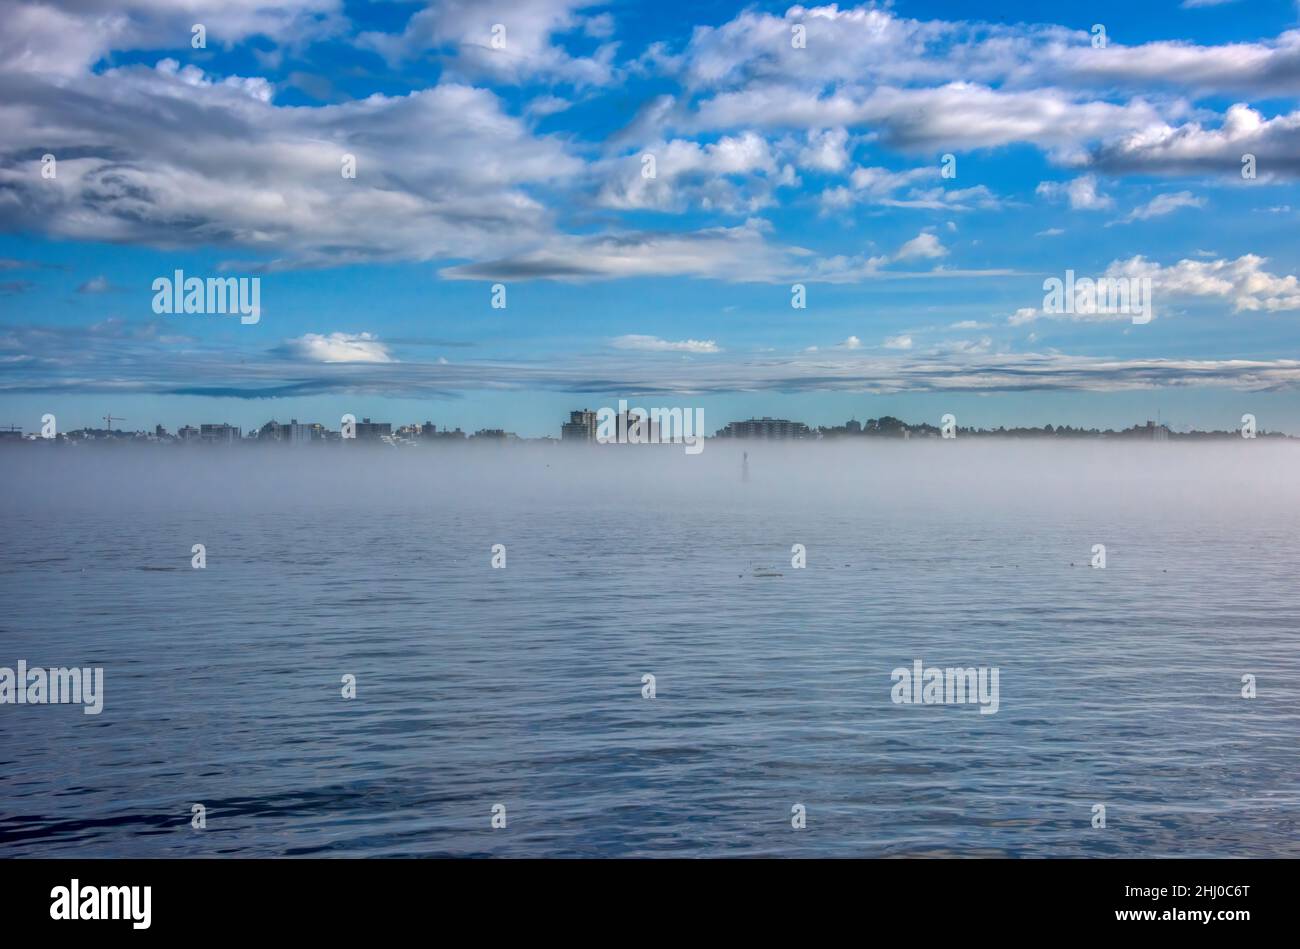 A Massive Fogbank Hinders View of Victoria, BC From Port Angeles Ferry Stock Photo